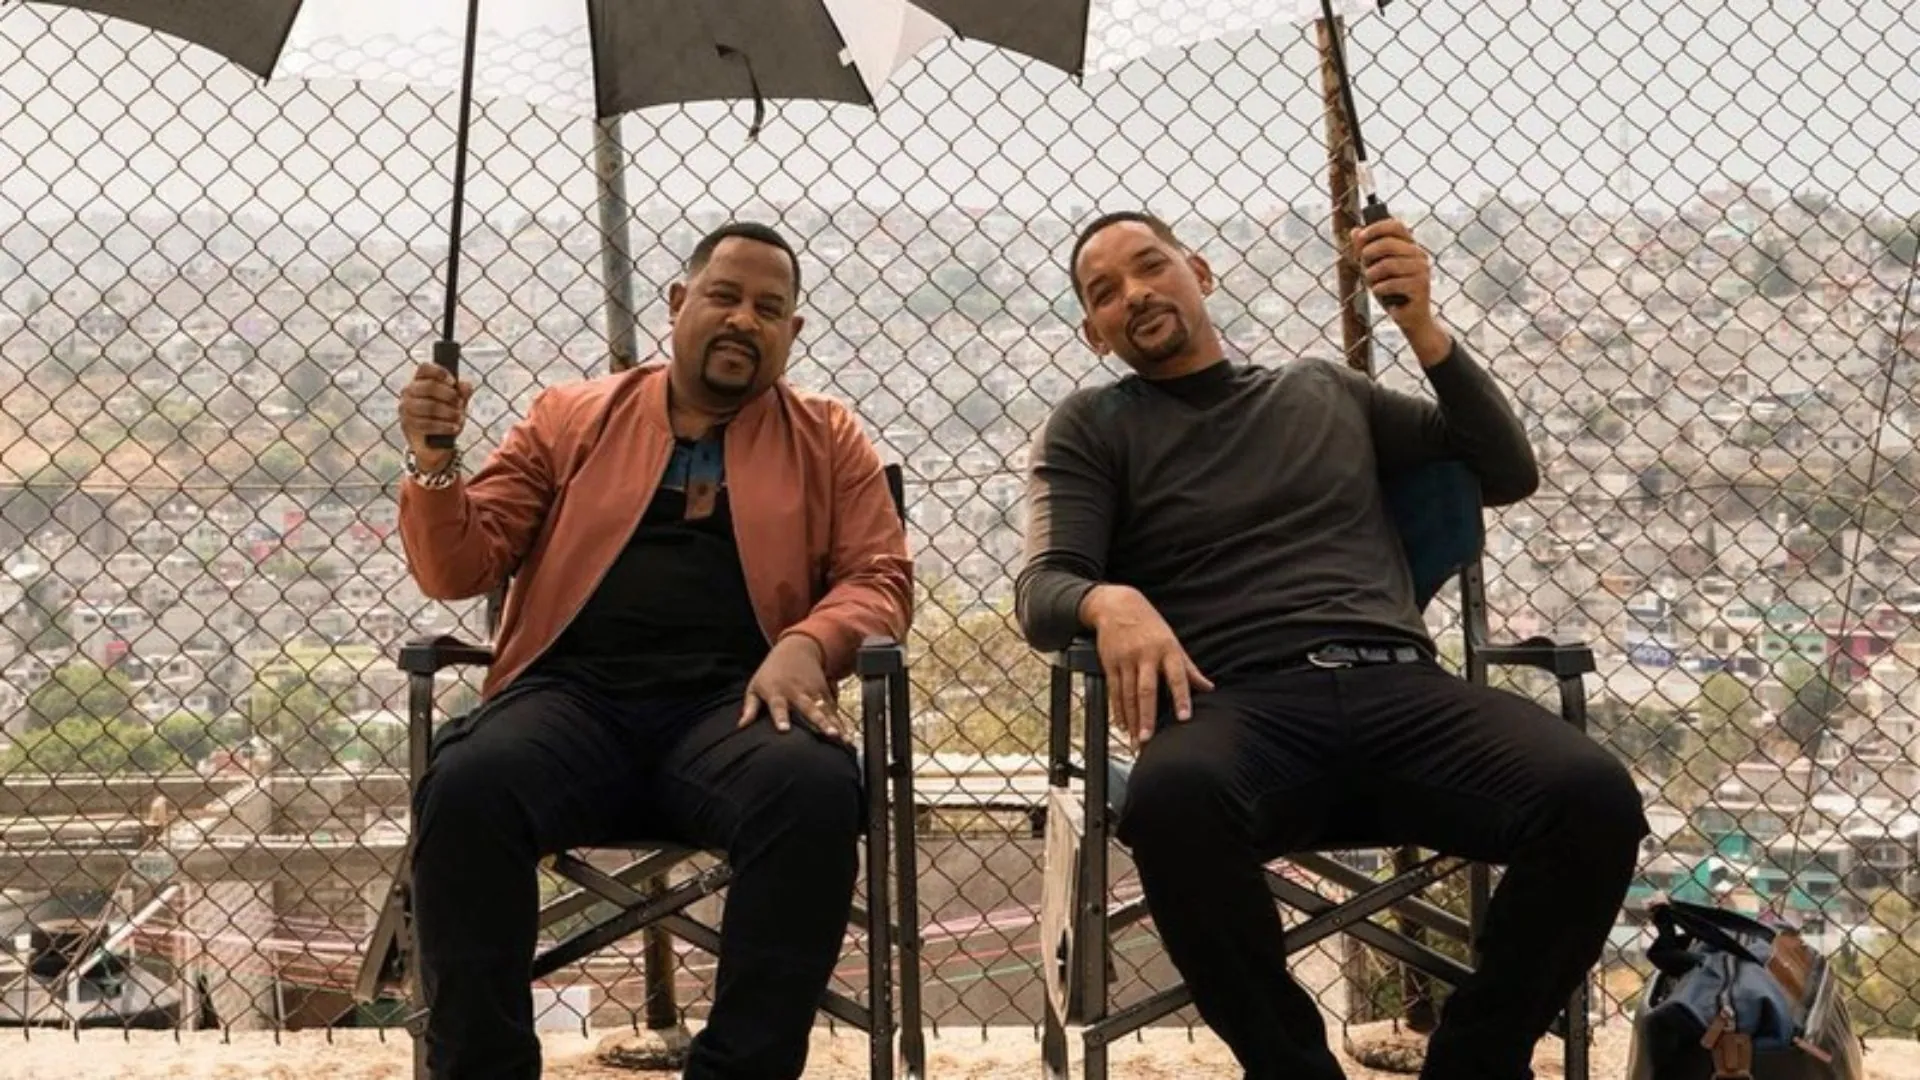 Bad Boys 4 Will Smith and Martin Lawrence Wrap Up Filming for the Highly Anticipated Sequel